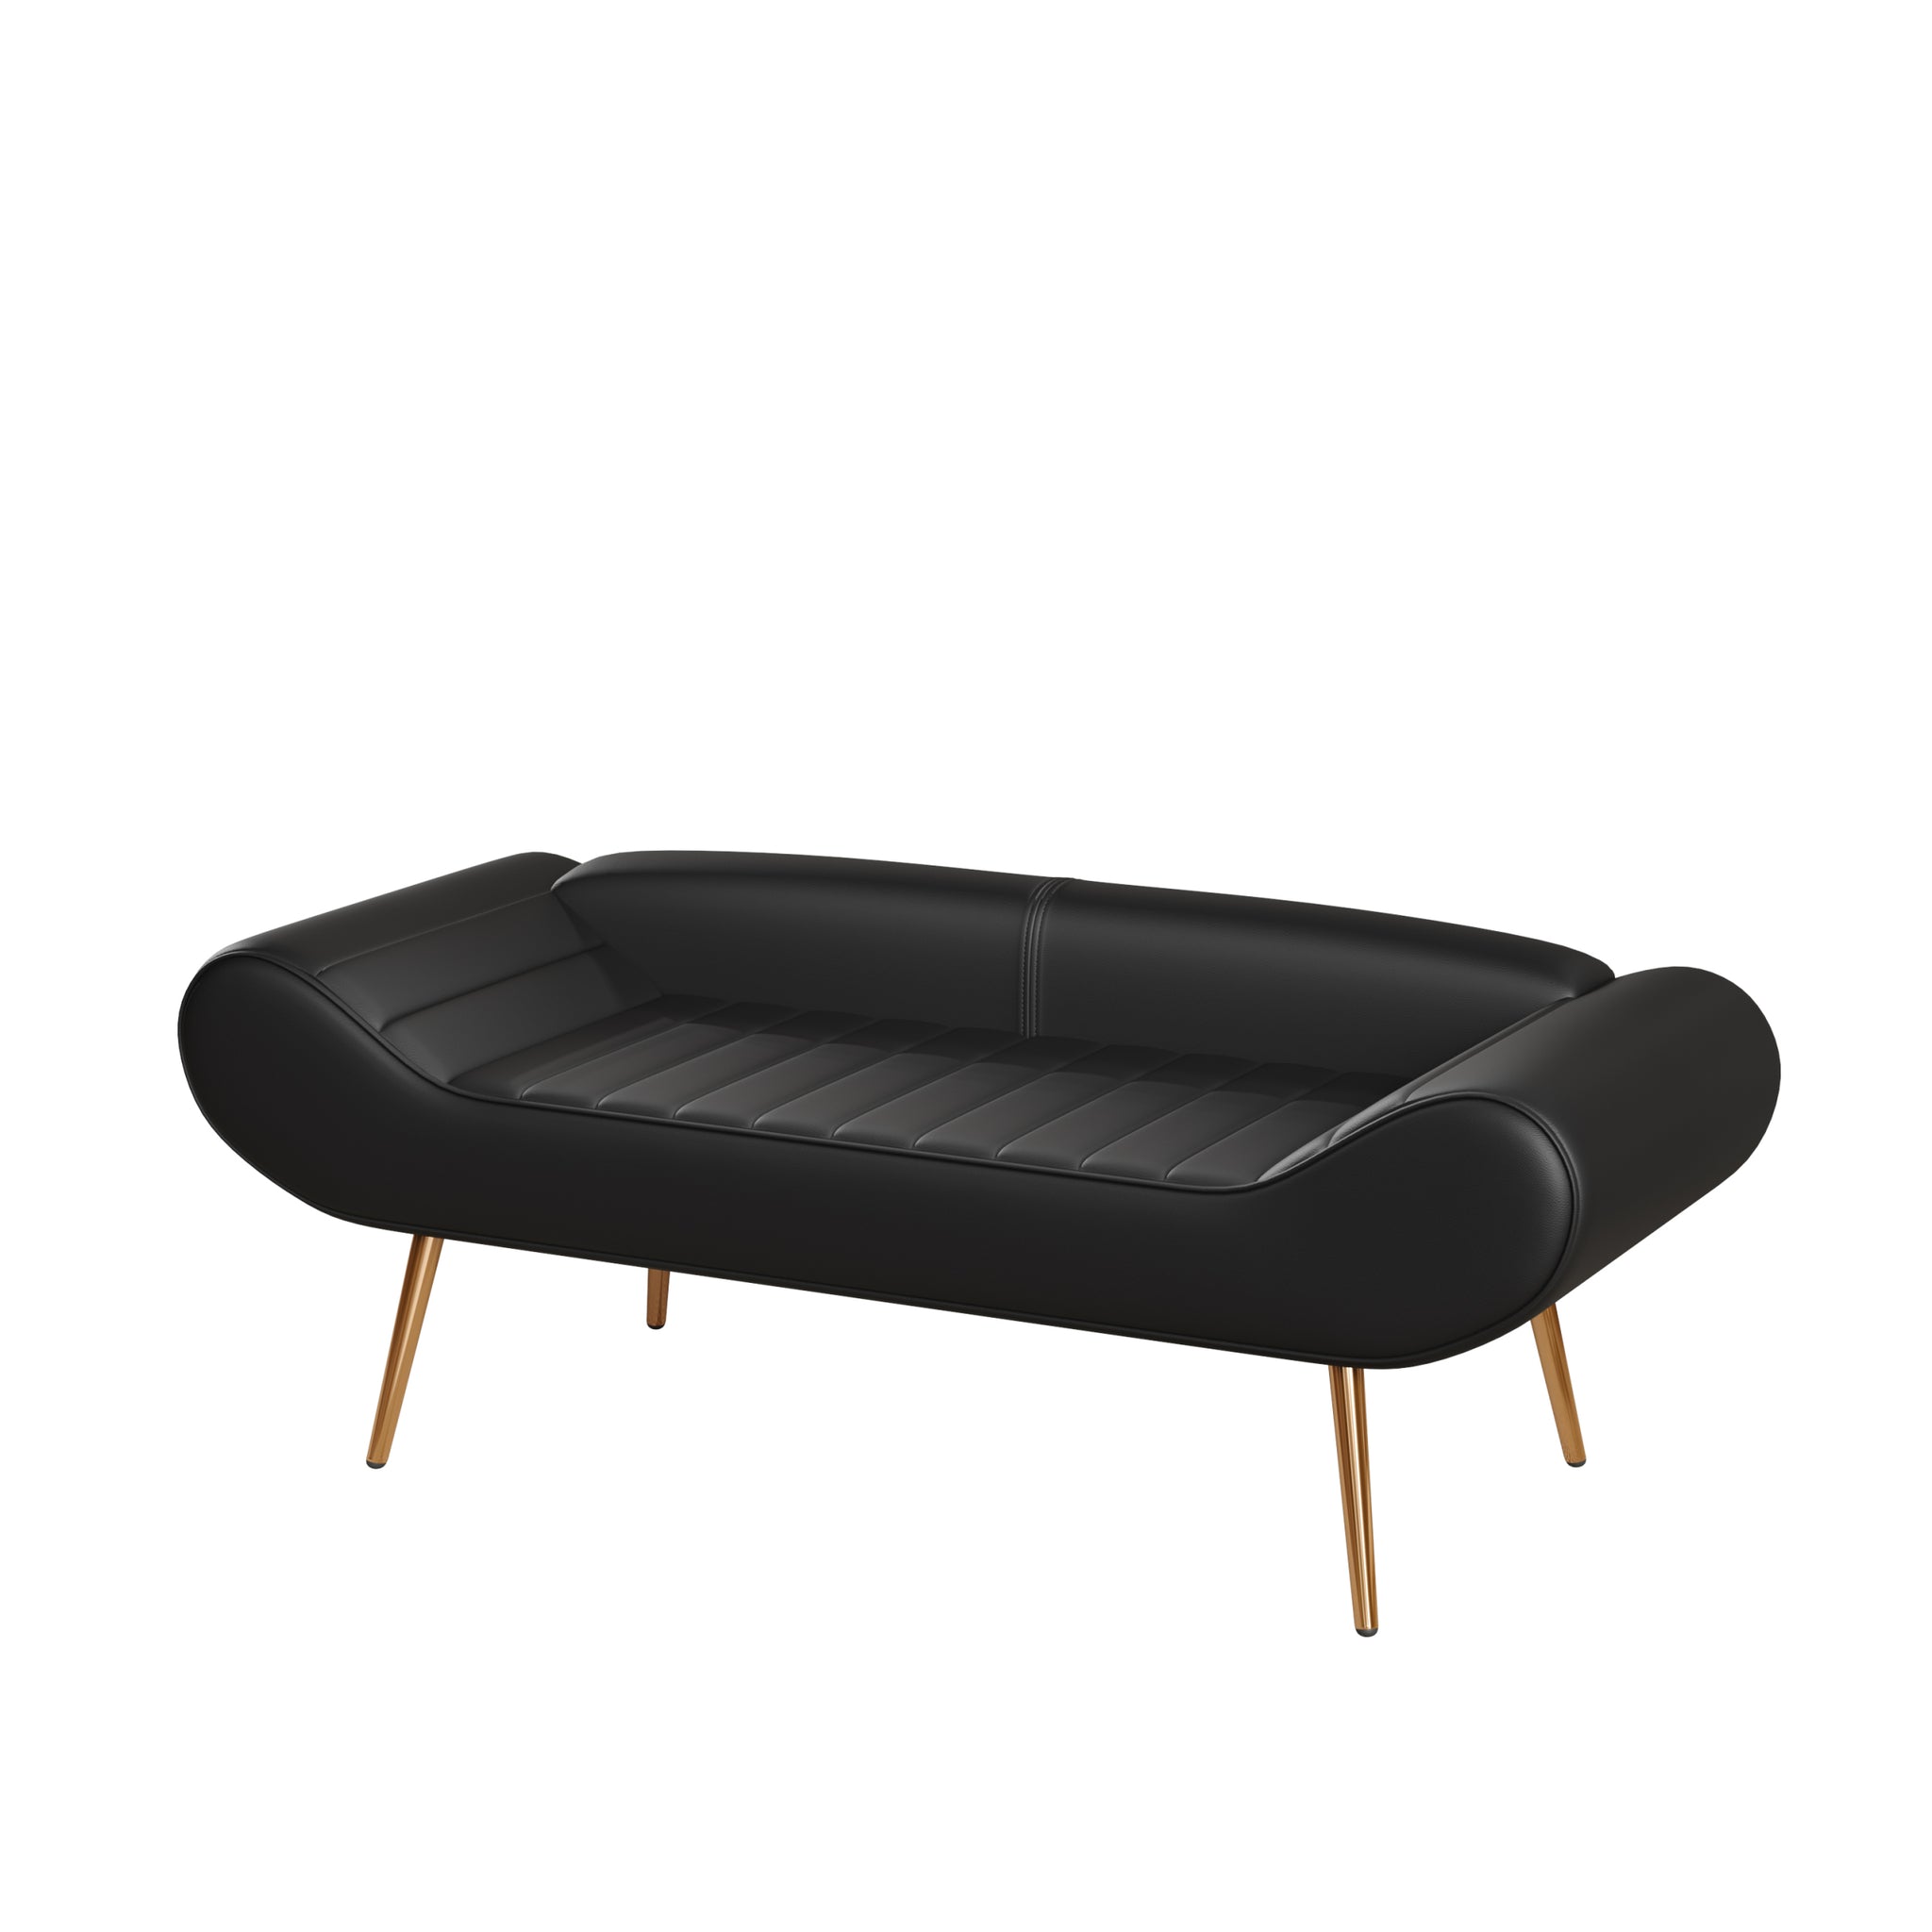 57 inch sofa stool PVC fabric can be placed in the bed black-polyester blend